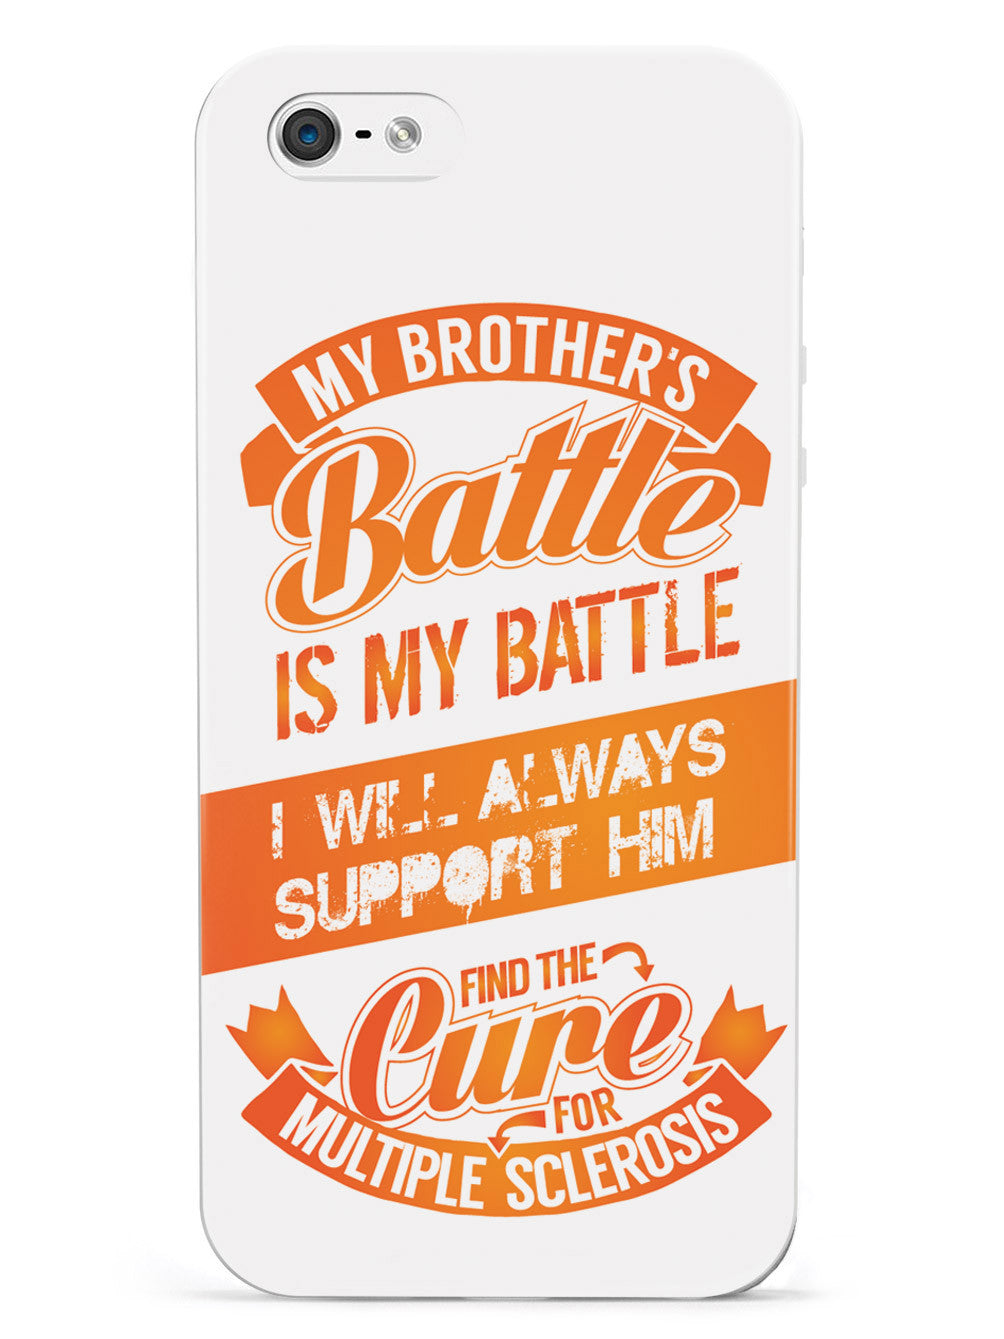 My Brother's Battle - Multiple Sclerosis Awareness/Support Case